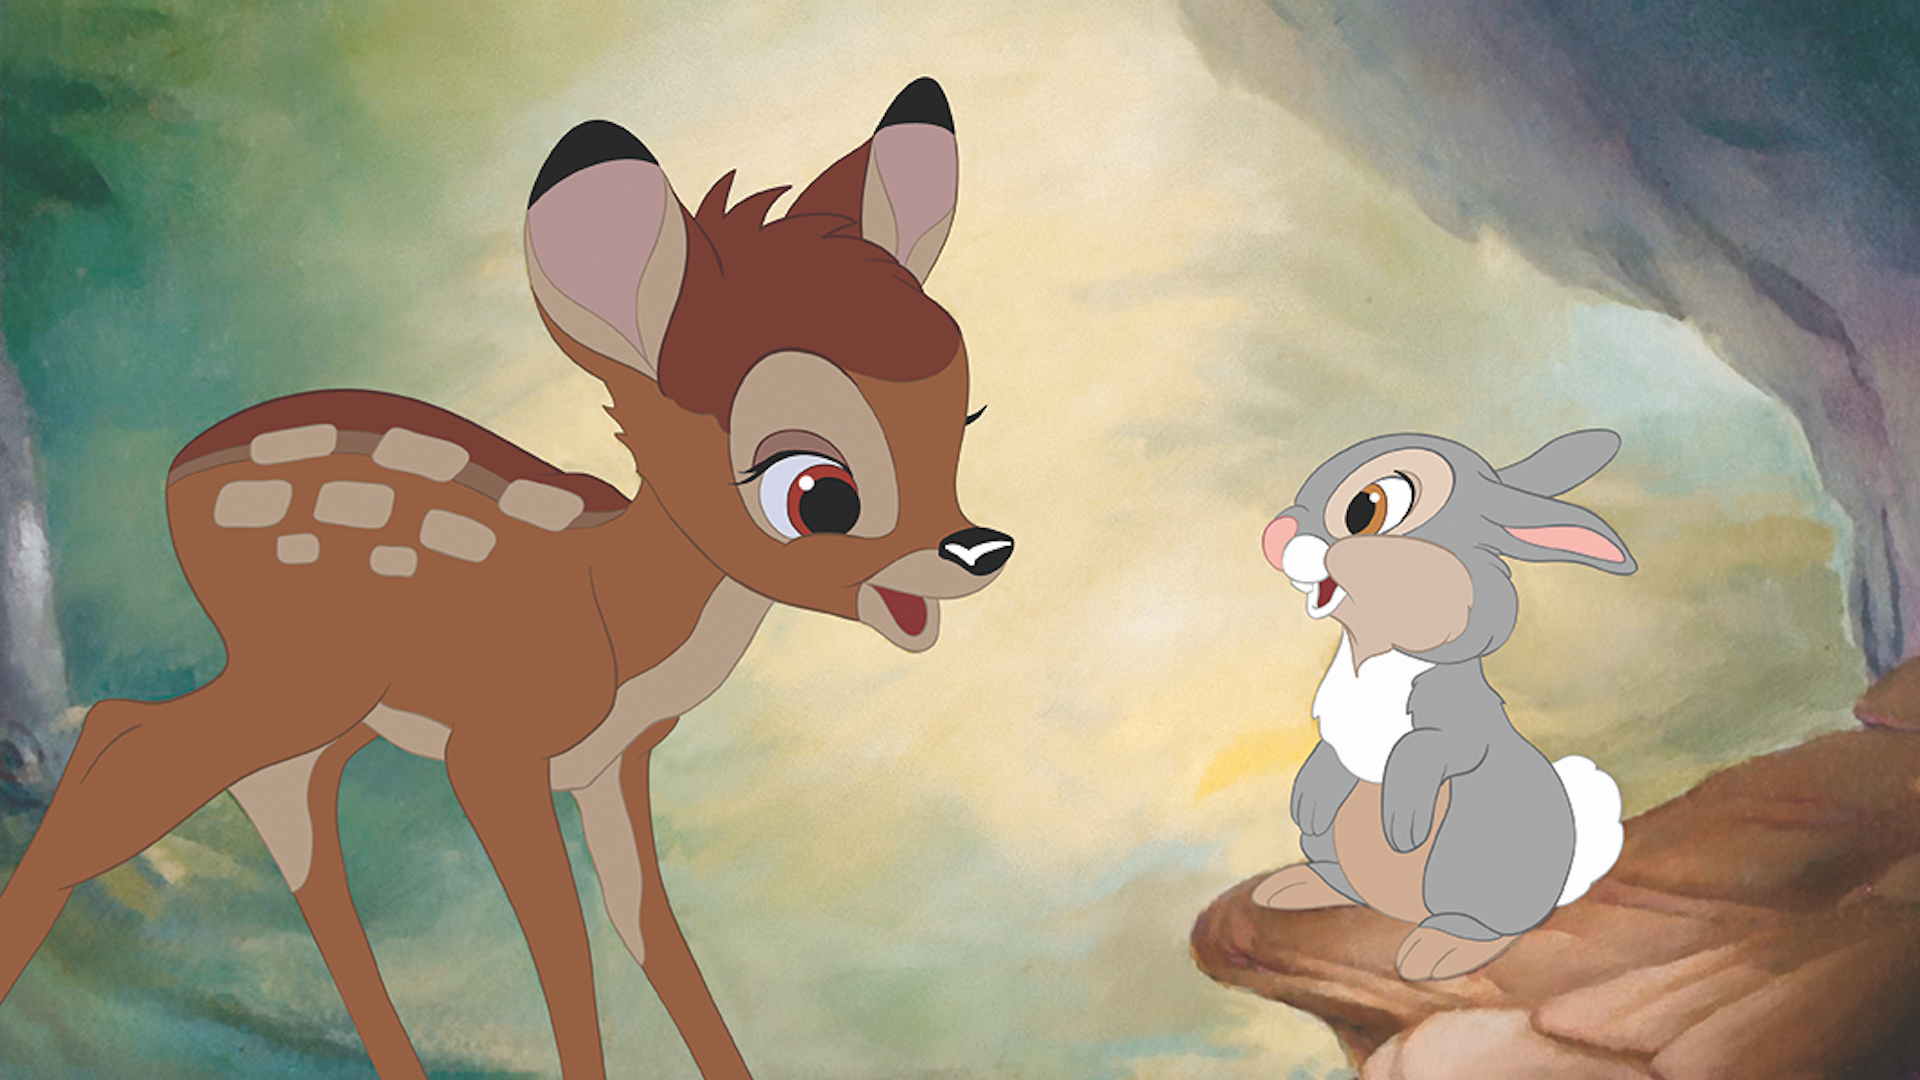 A scene from Bambi